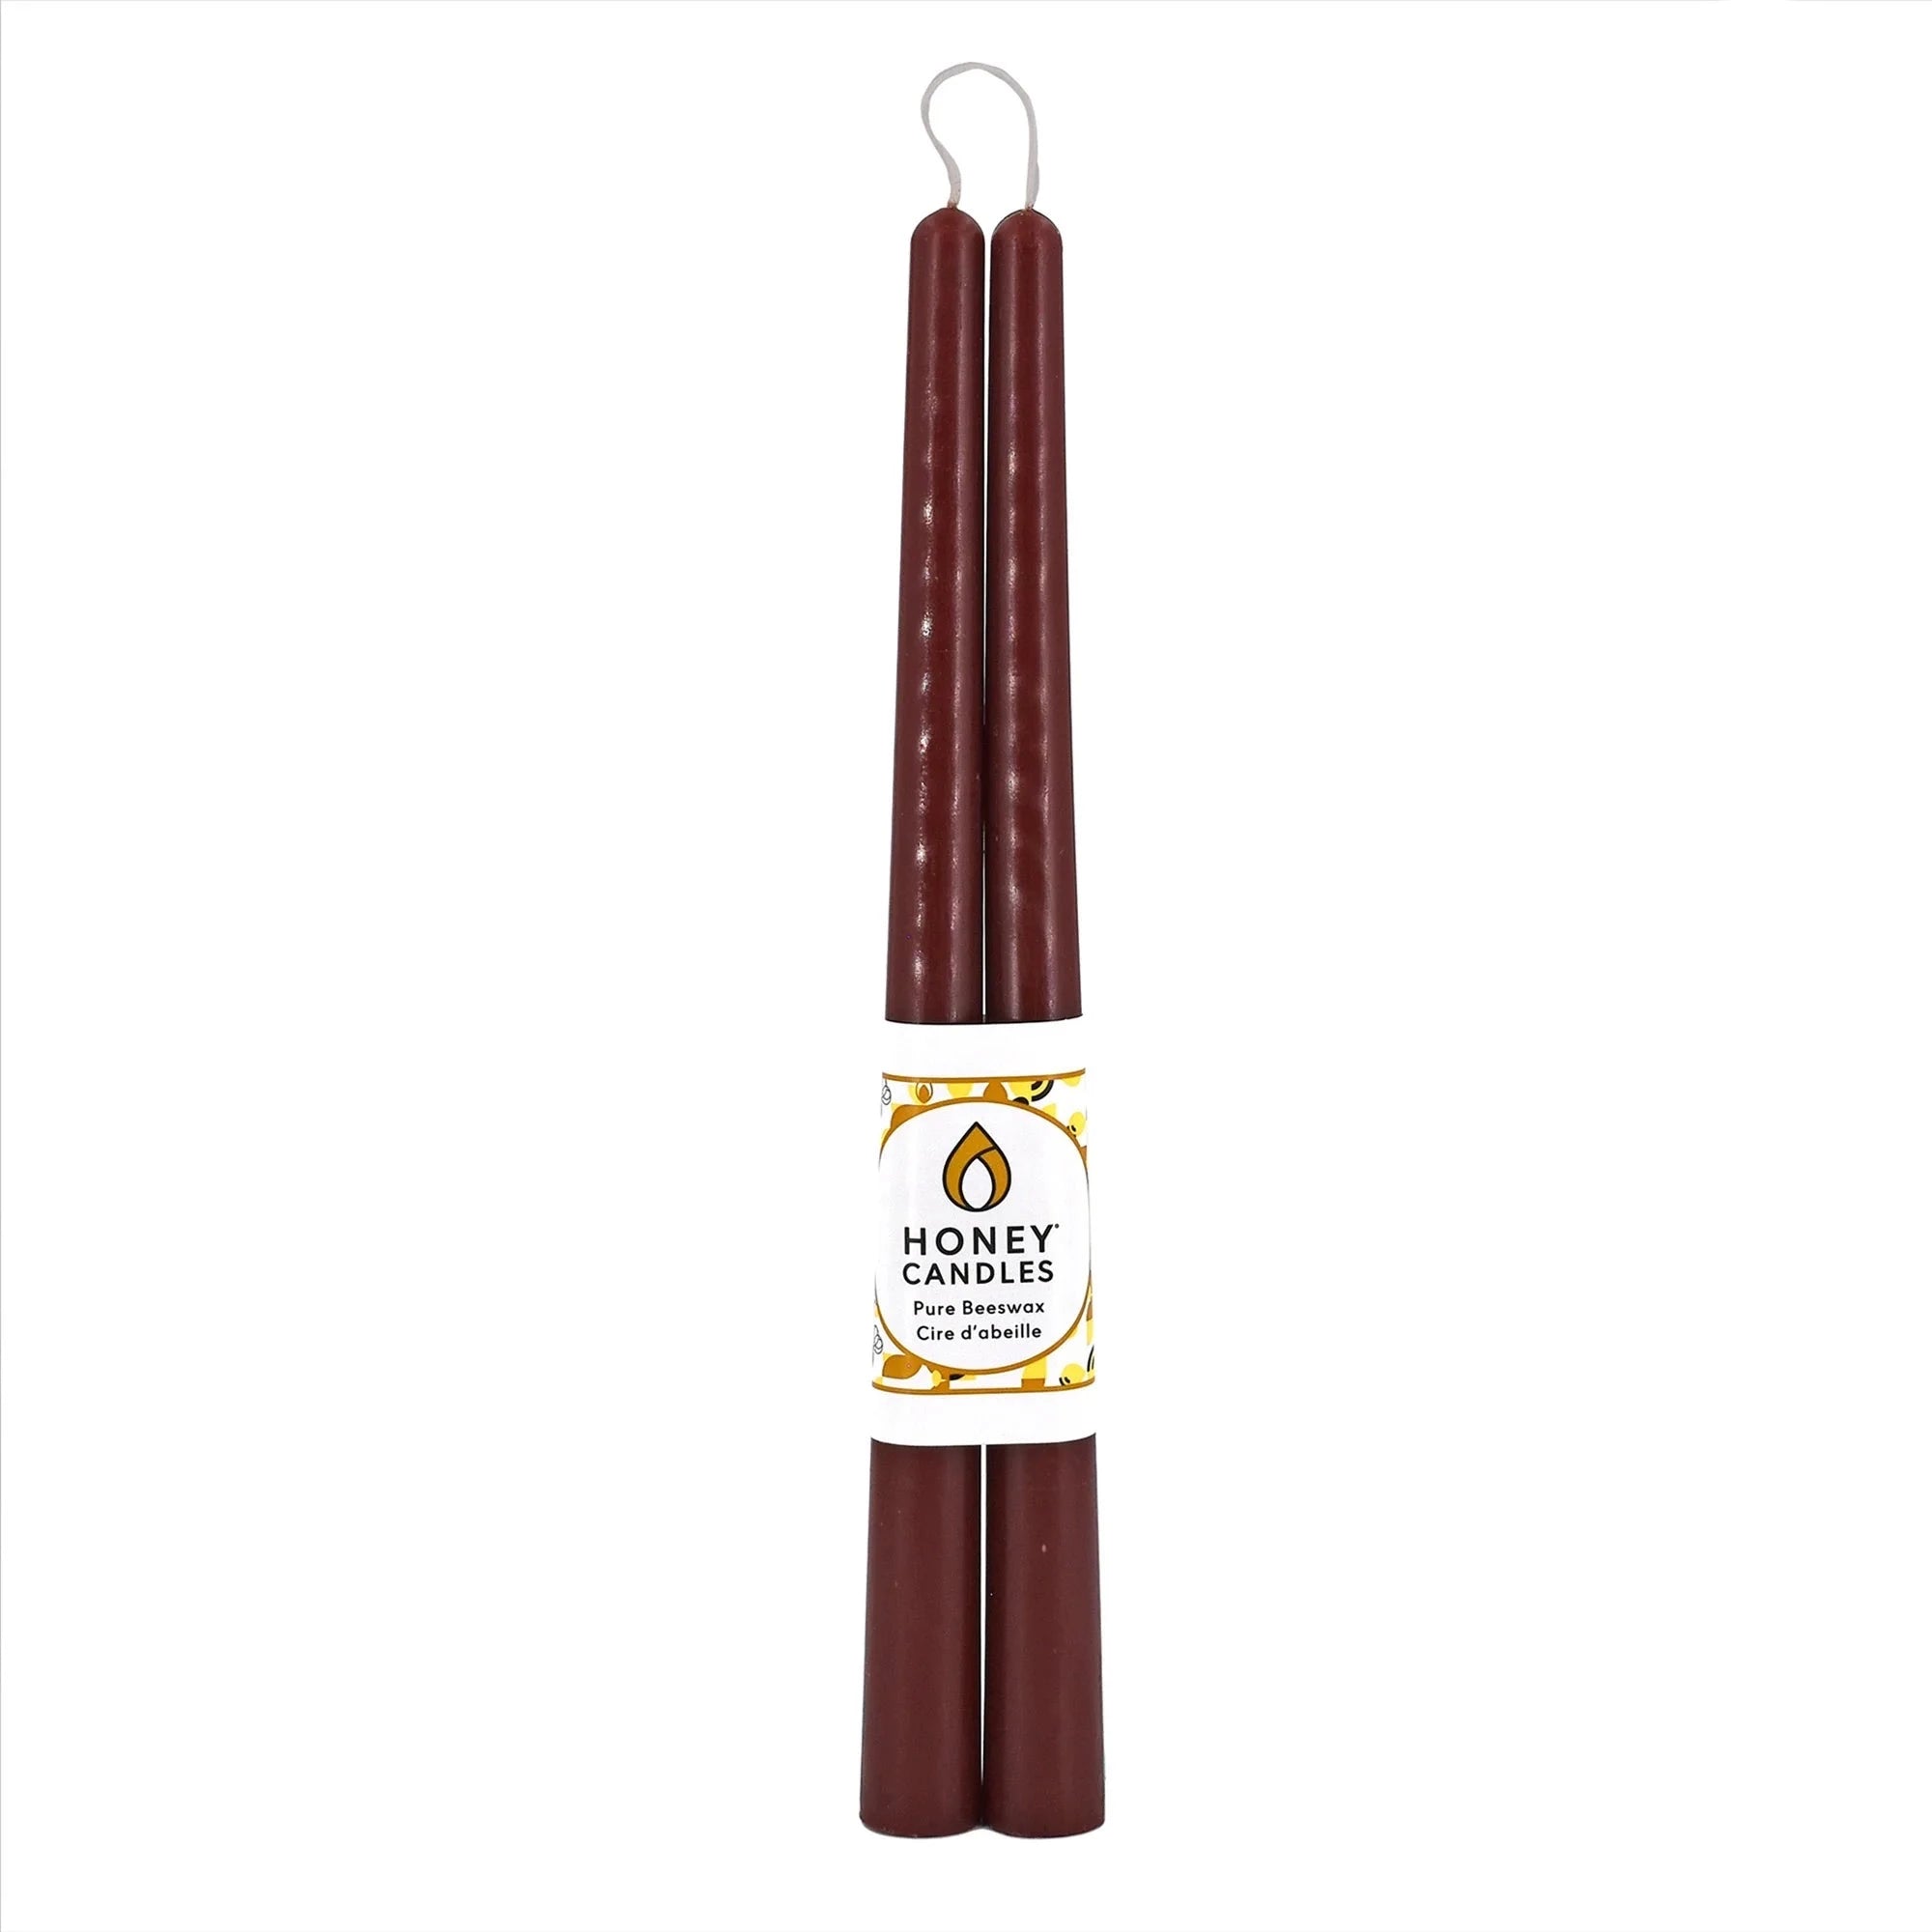 12" Taper Beeswax Candles - Dark Brown